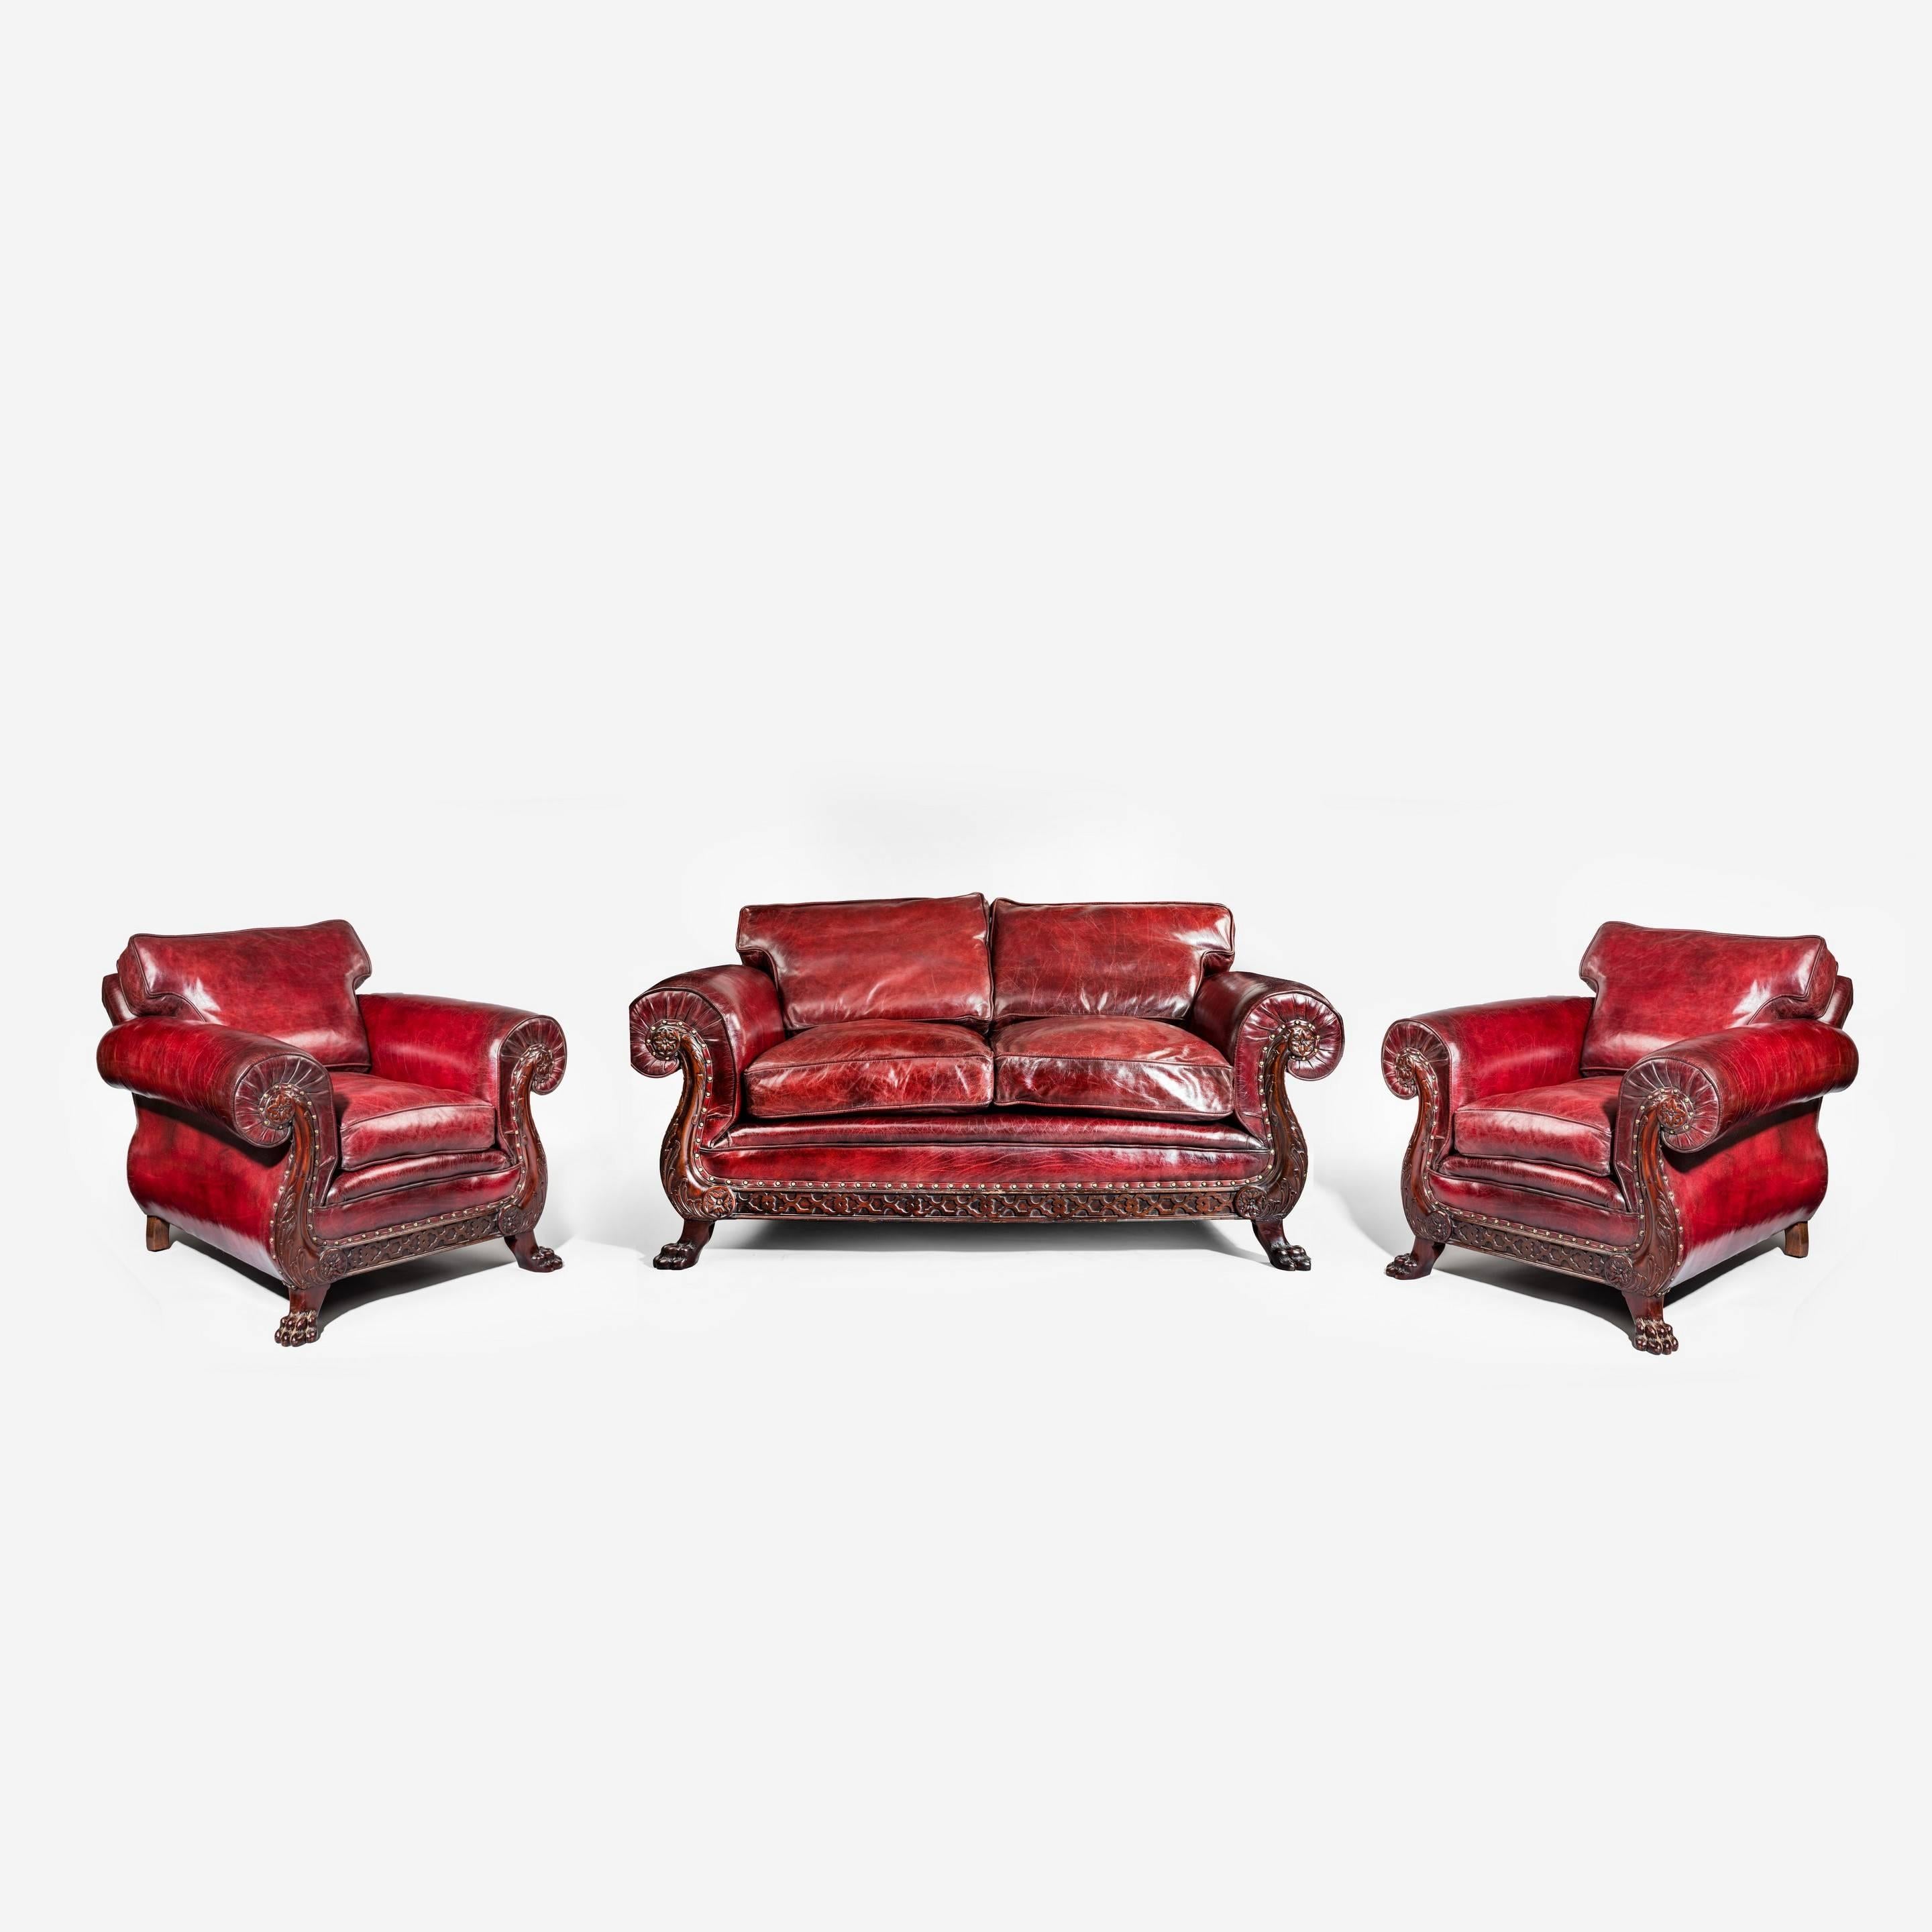 A two-seat early 20th century mahogany oversized red leather sofa, with carved pawed feet, attributed to Maples. 

Matches beautifully the pair of armchairs we also have for sale.